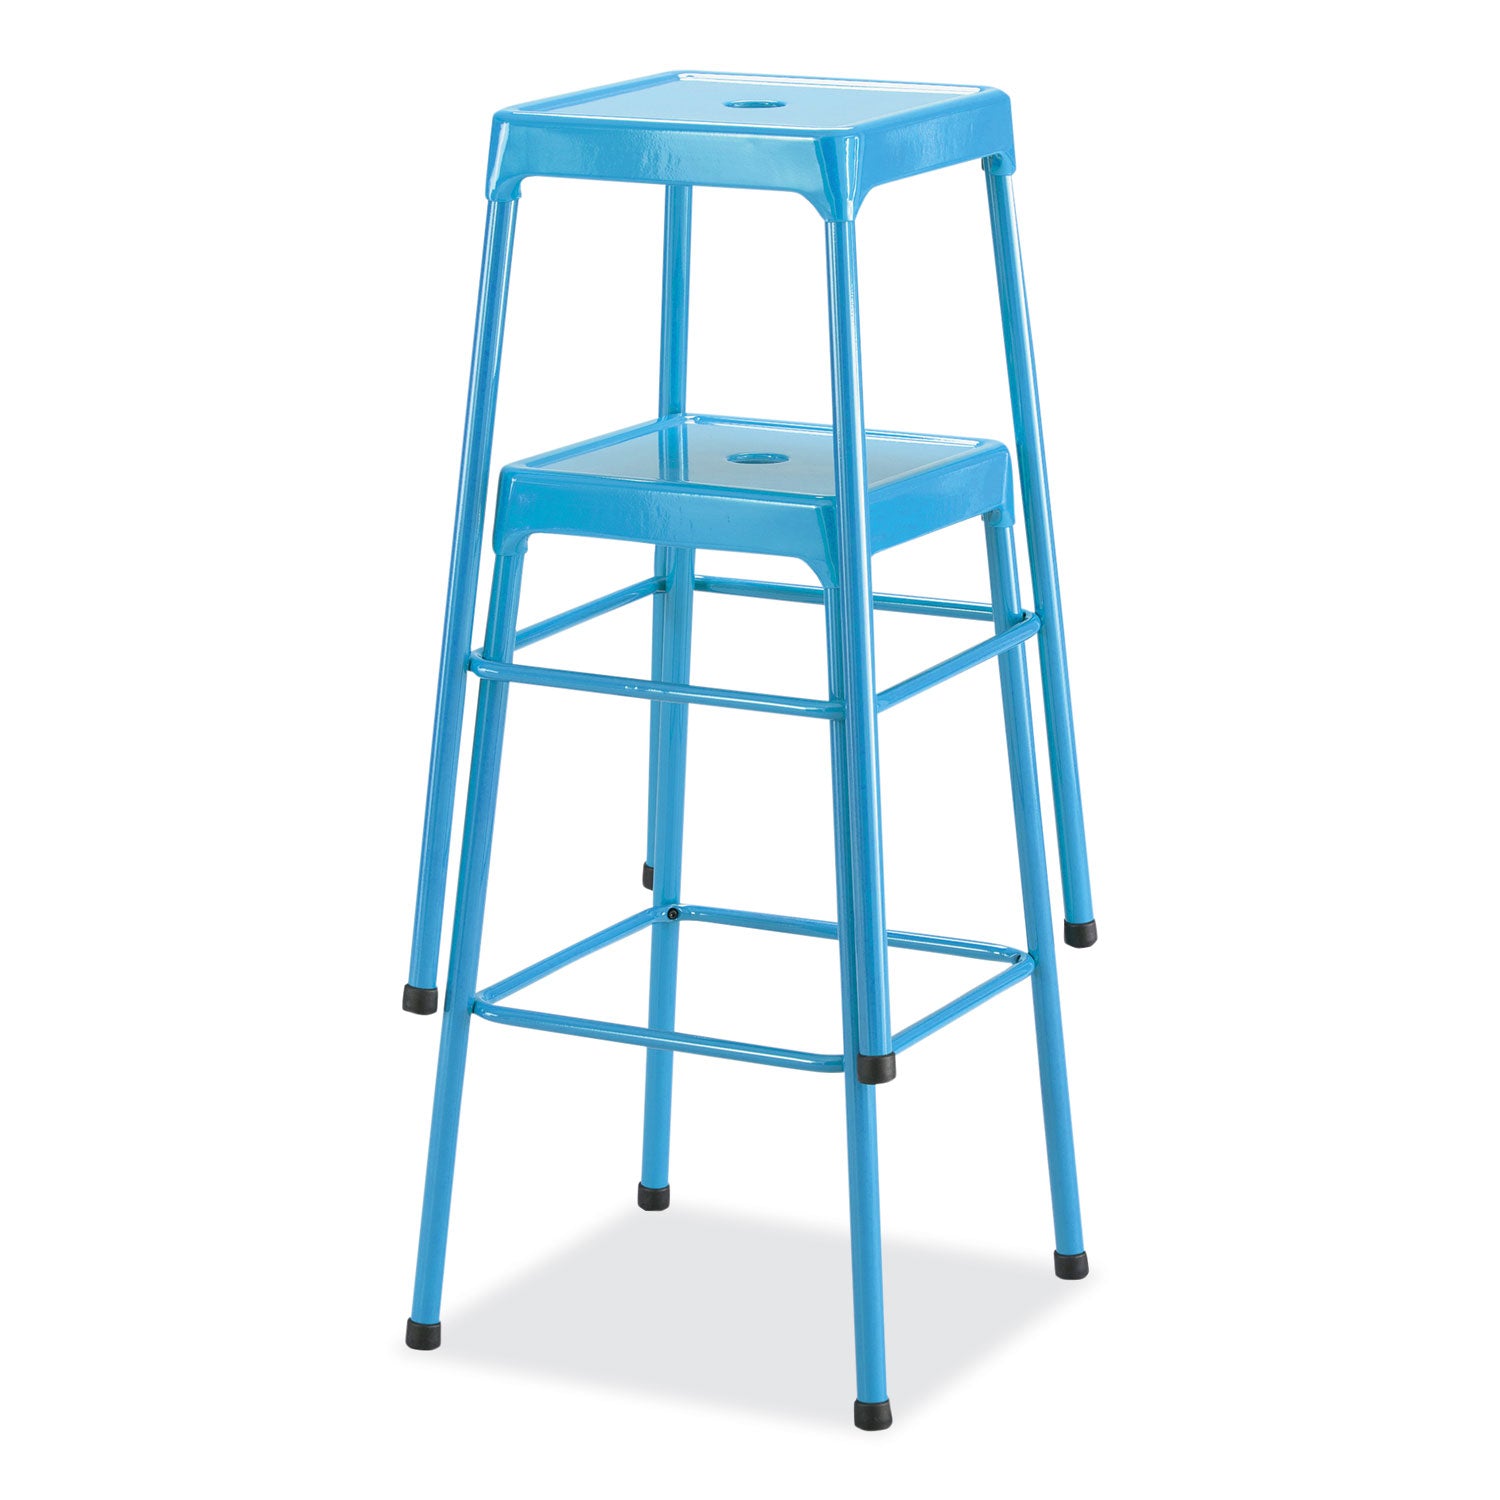 steel-bar-stool-backless-supports-up-to-275-lb-29-seat-height-babyblue-seat-babyblue-base-ships-in-1-3-business-days_saf6606bu - 2